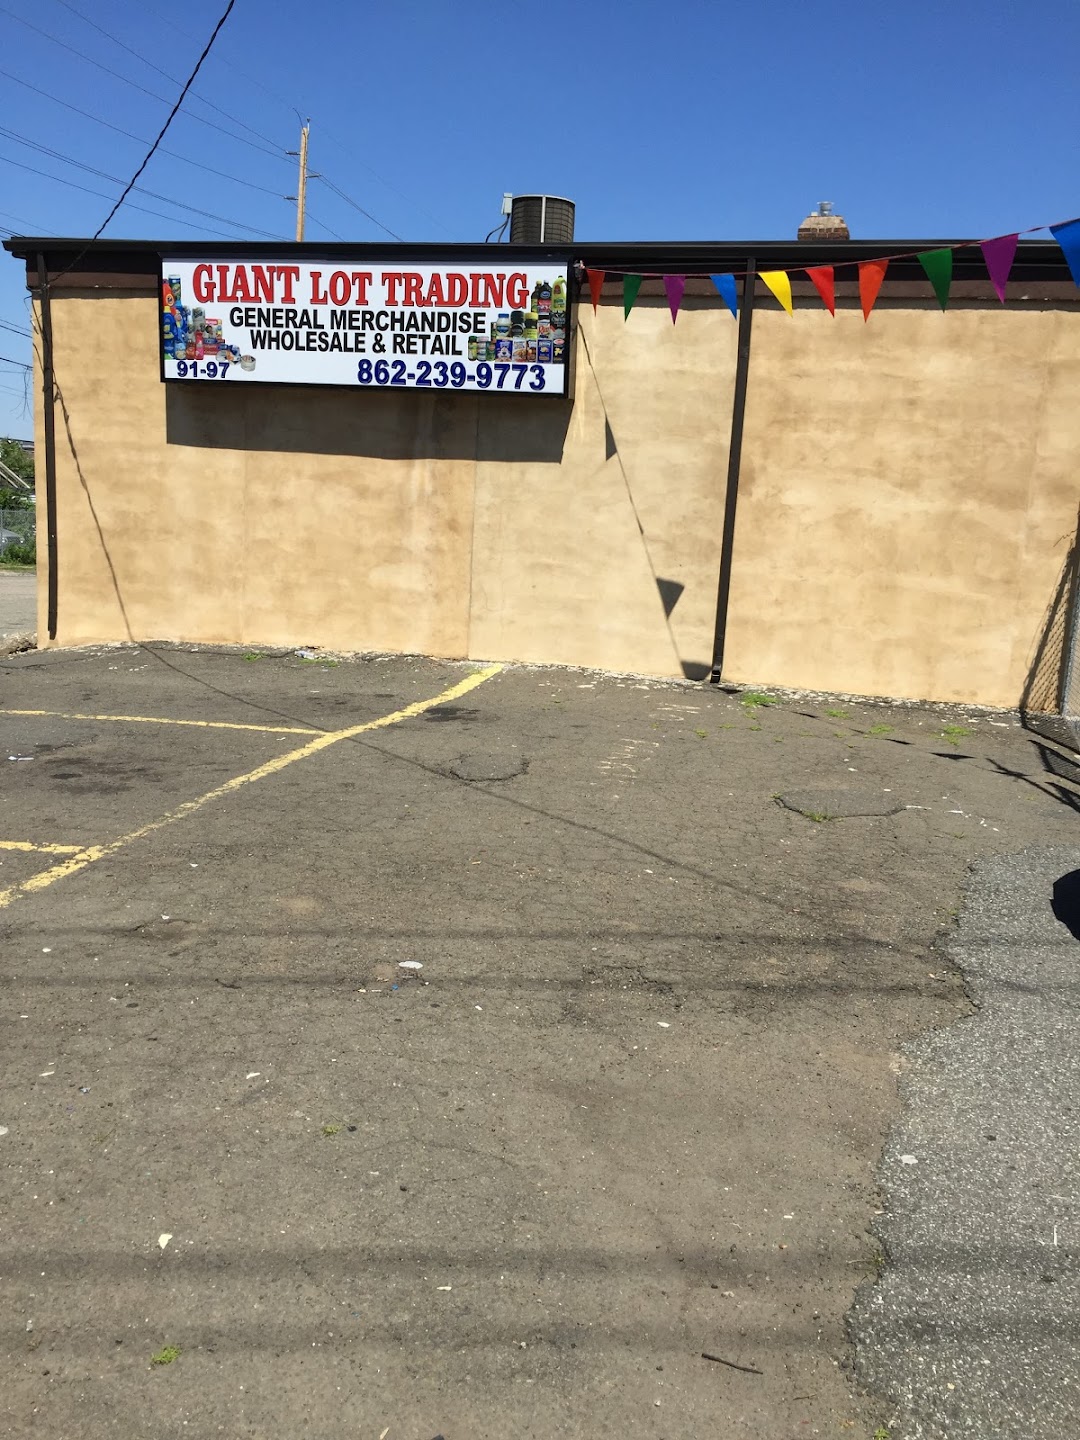 Giant Lot Trading